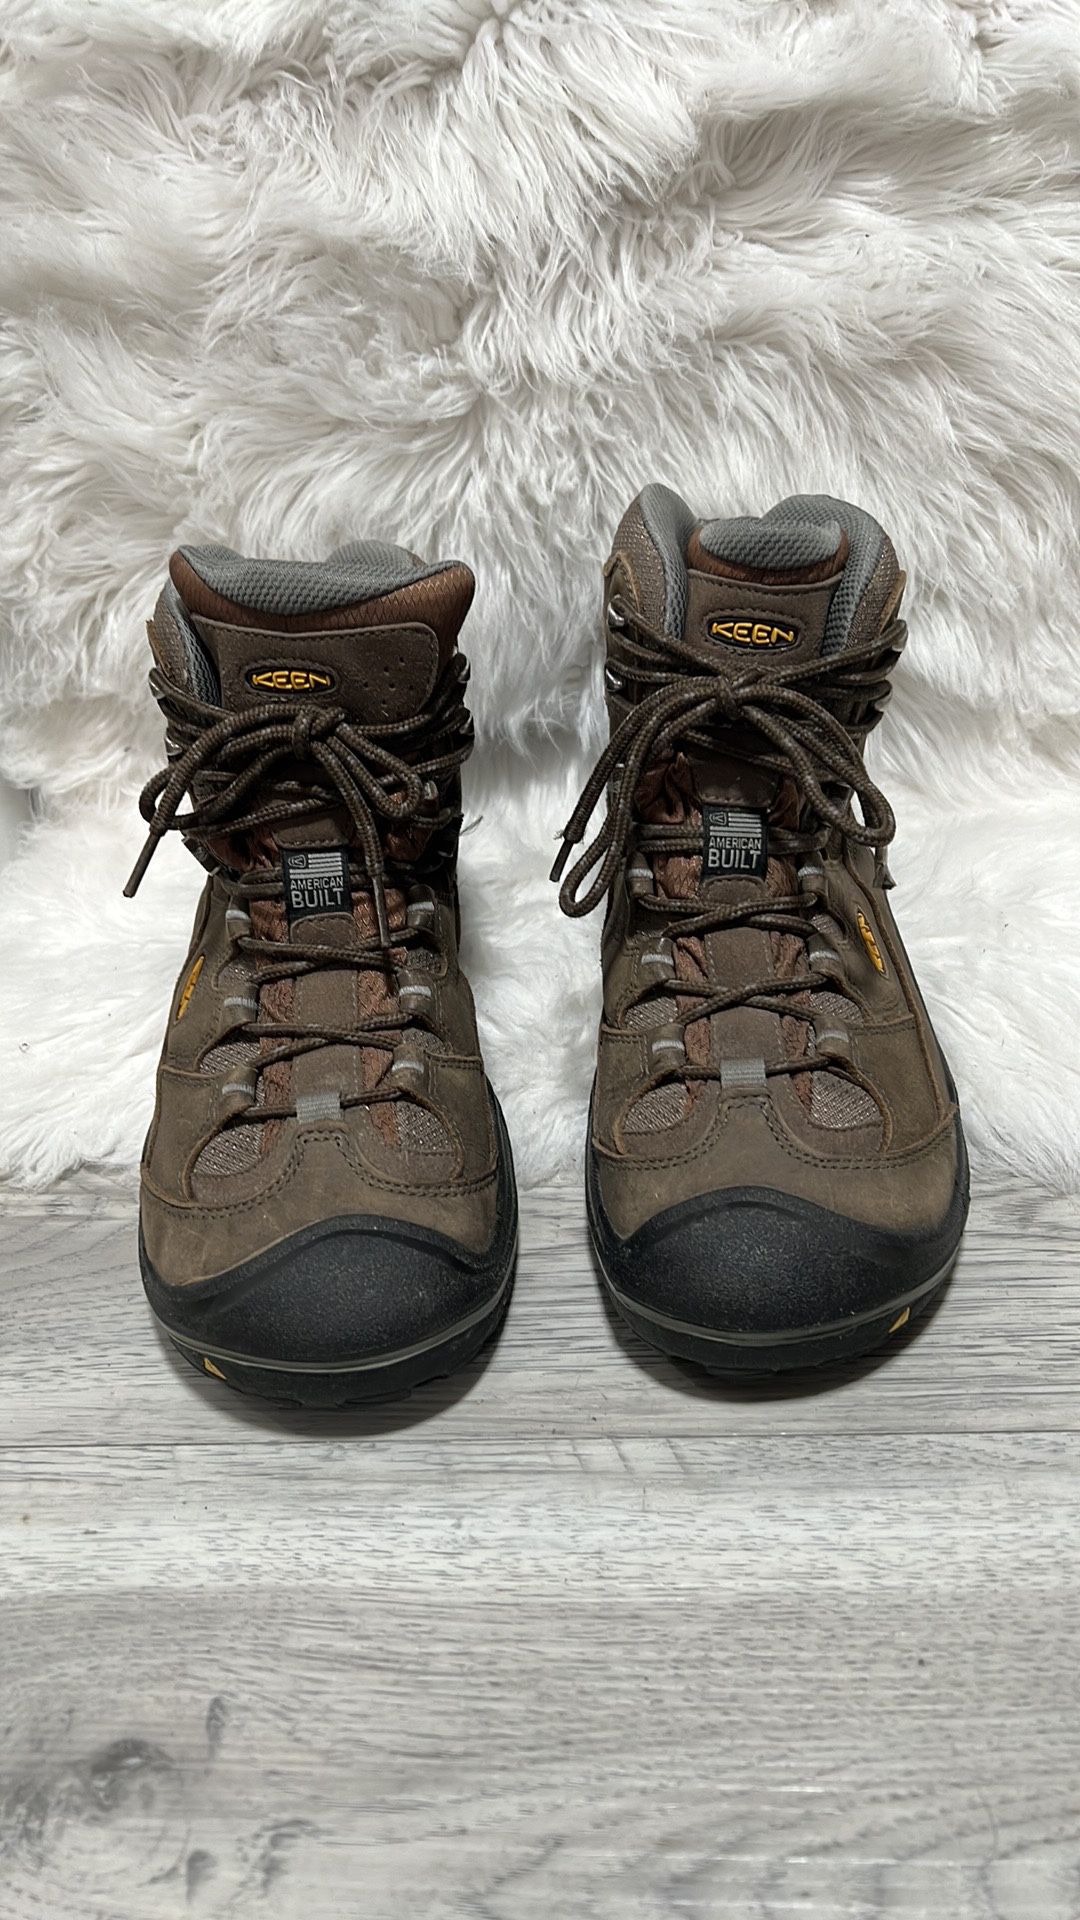 Keen Men's Durand II Mid Waterproof size 11.5 Hiking boots brown leather